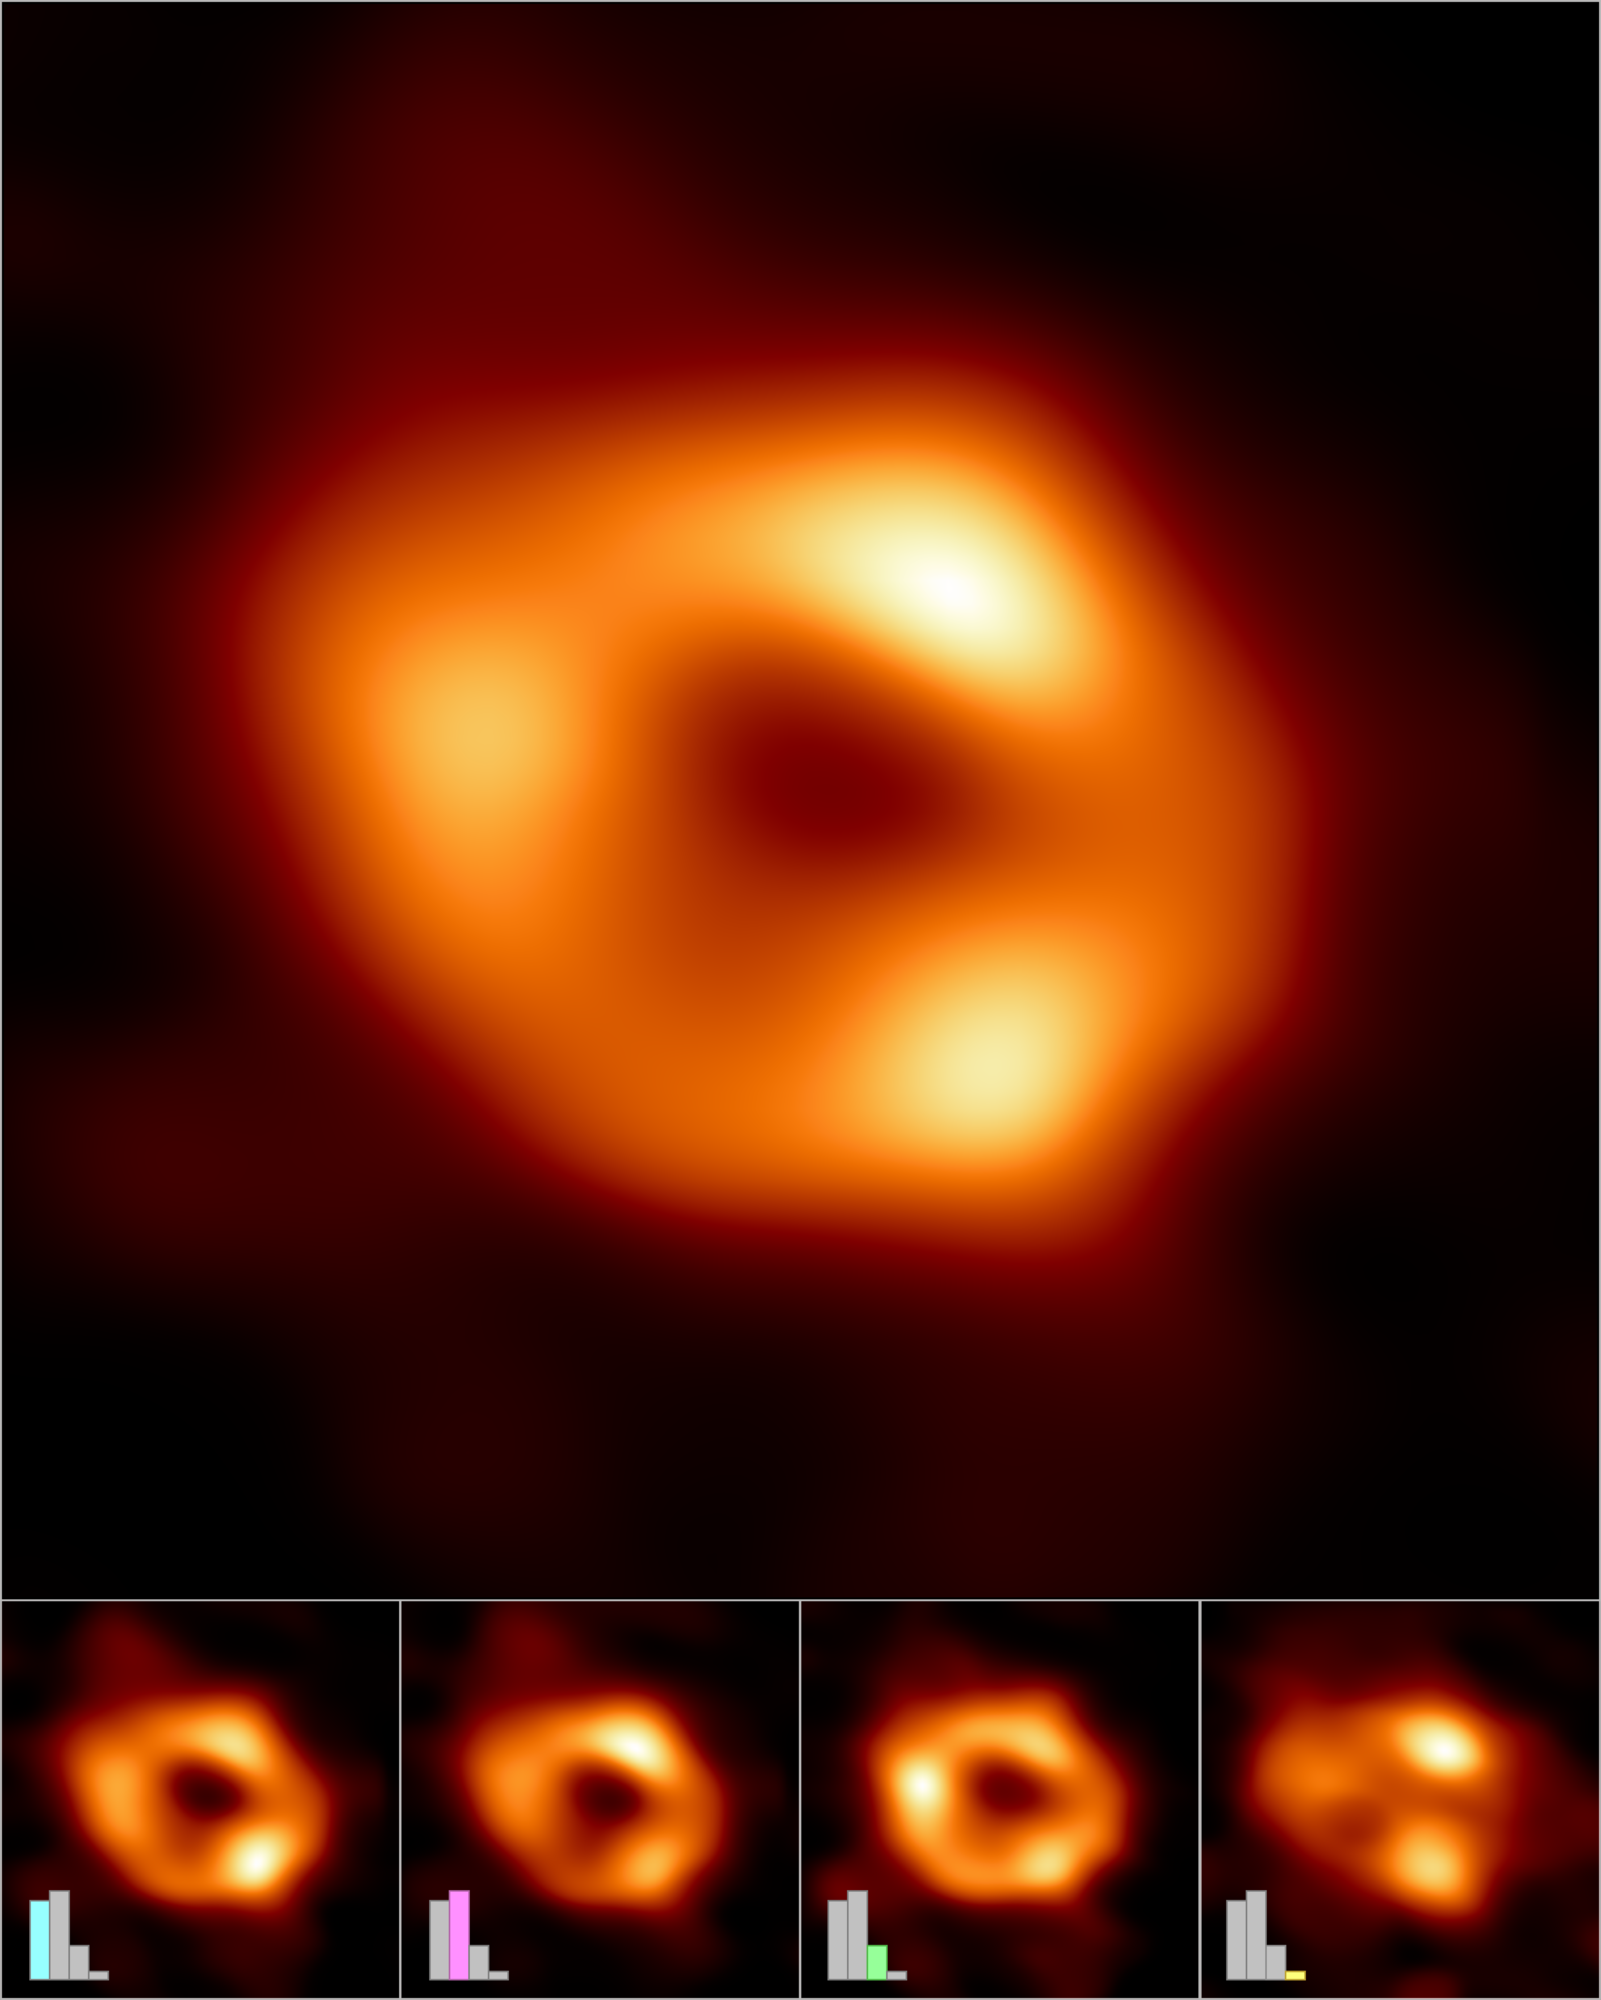 The Event Horizon Telescope (EHT) Collaboration has created a single image (top frame) of the supermassive black hole at the centre of our galaxy, called Sagittarius A* (or Sgr A* for short), by combining images extracted from the EHT observations. Credit Event Horizon Telescope Collaboration